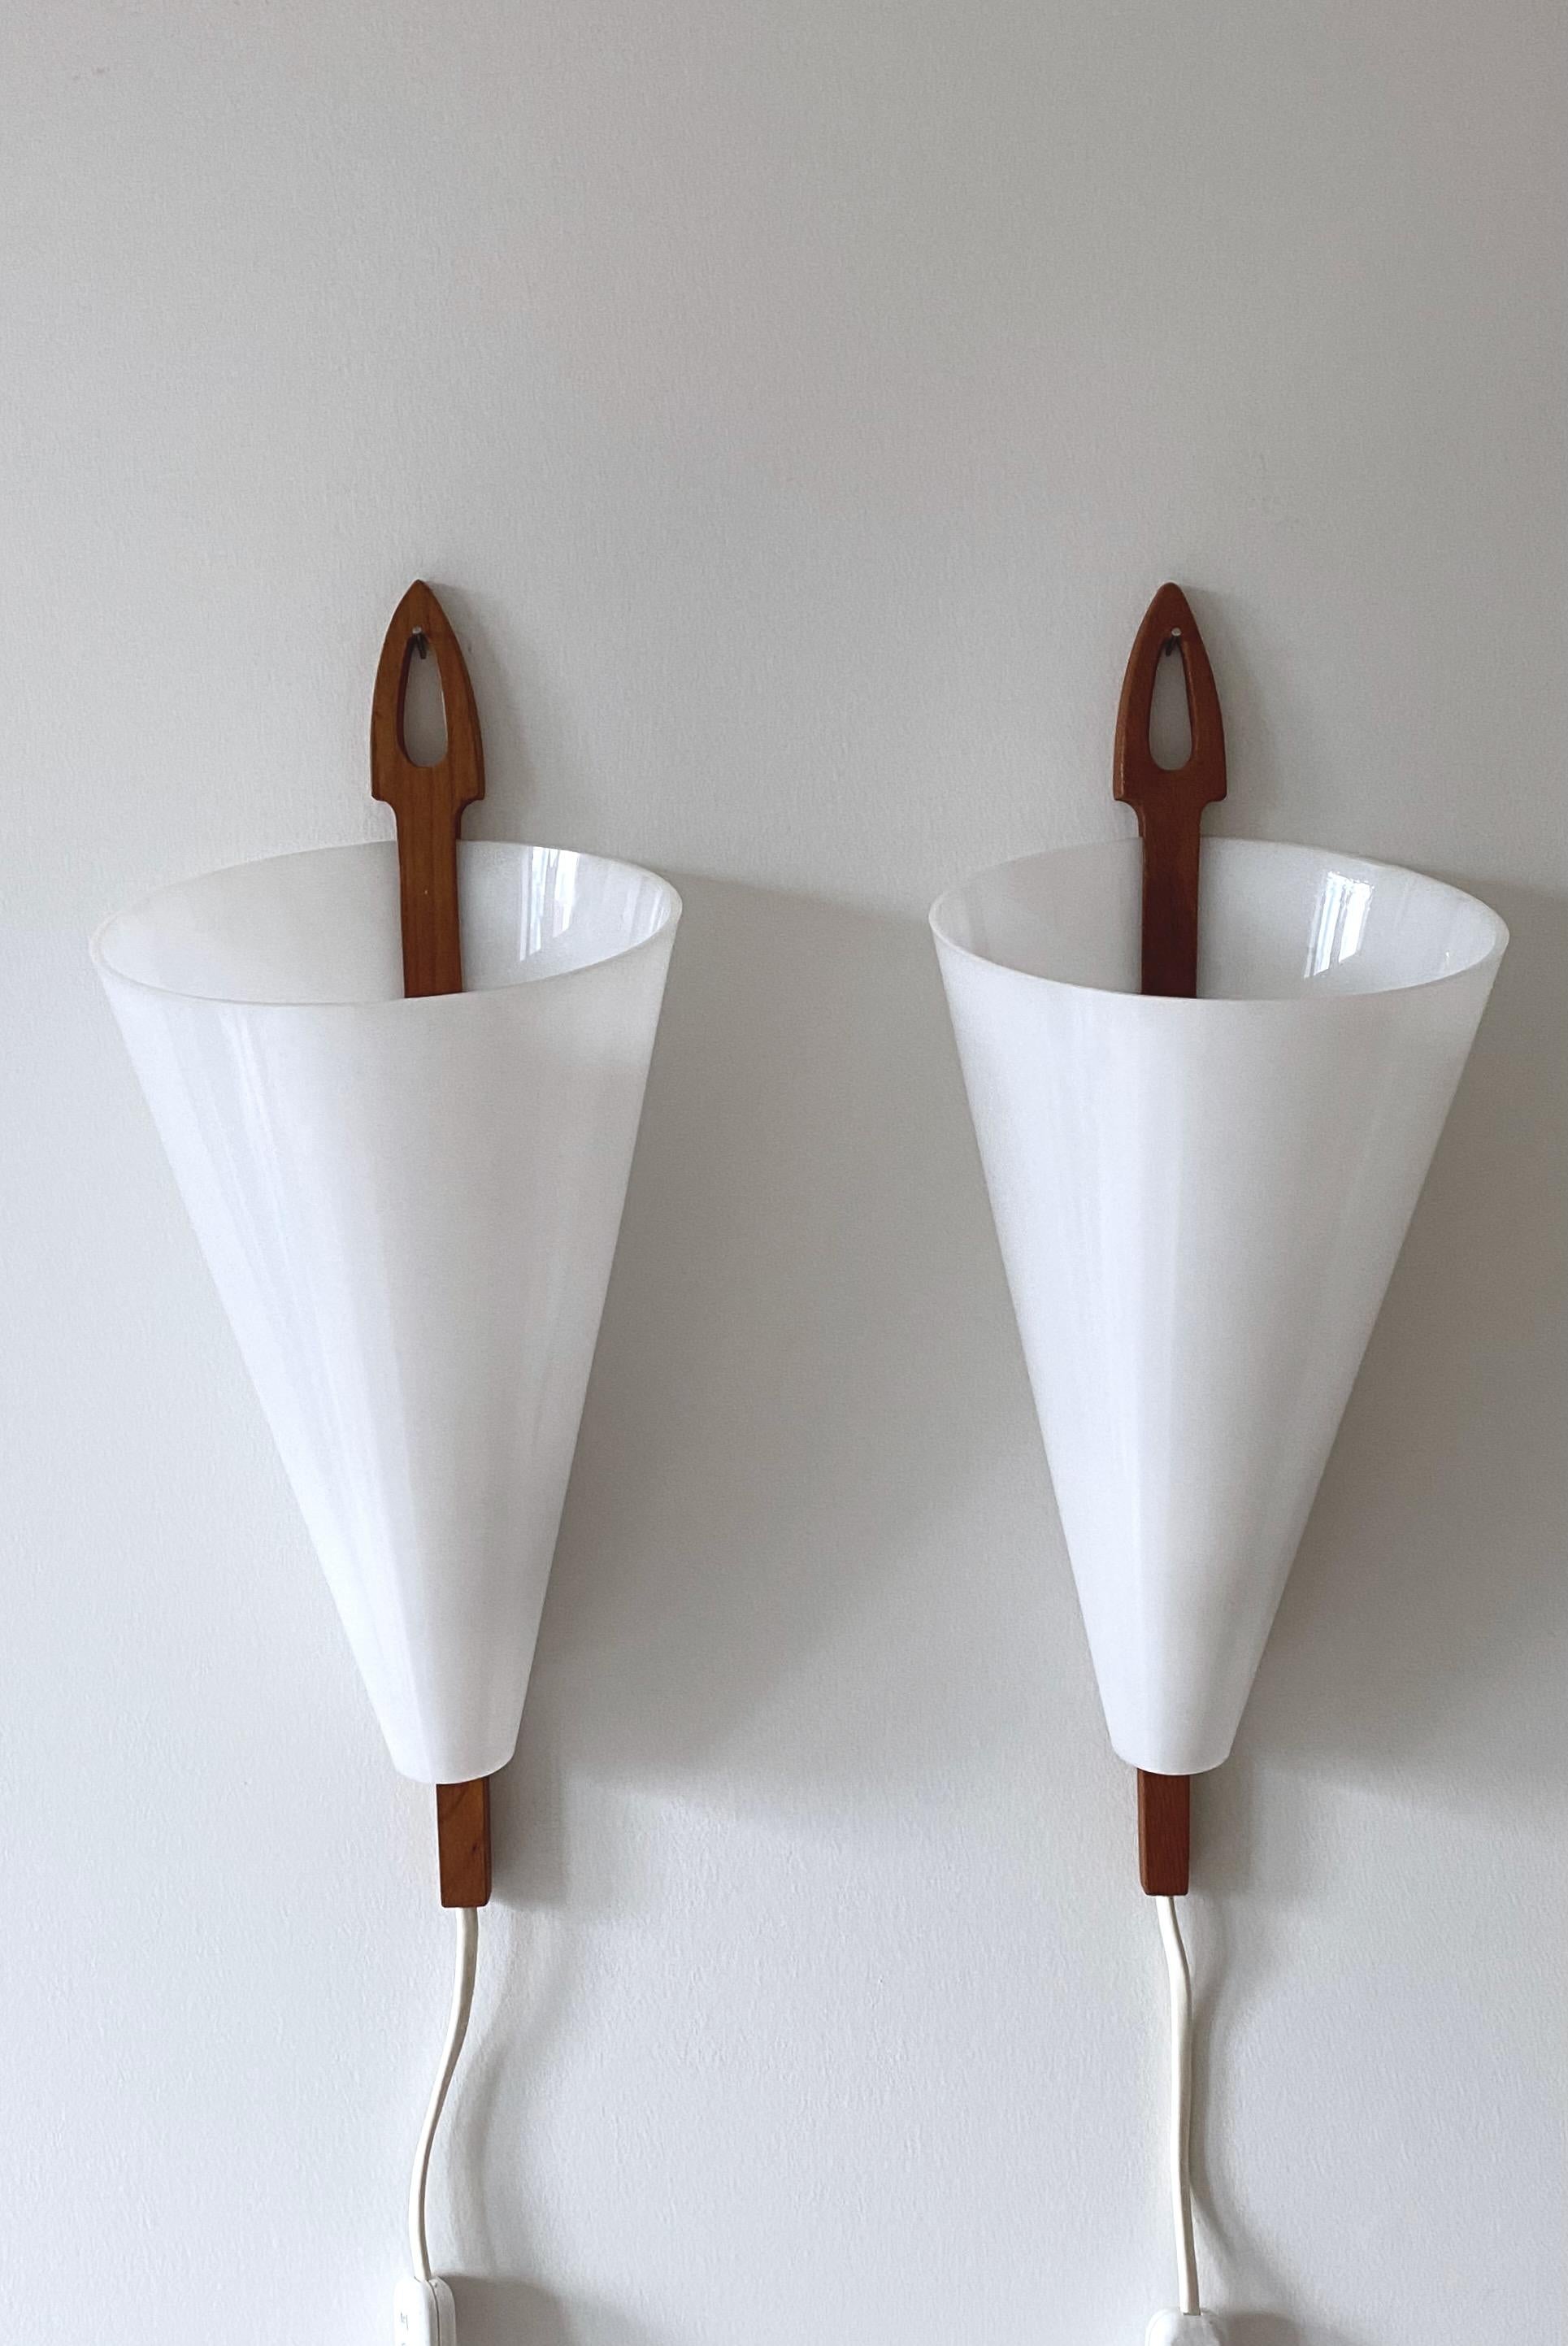 Pair of Wall lamps by iconic Swedish Mid-Century lamp designer Hans-Agne Jakobsson for him eponyms brand in Markaryd, Sweden. Hard plastic white lamp shades with a simple and classic teak arm design. Very good condition with the designers label on